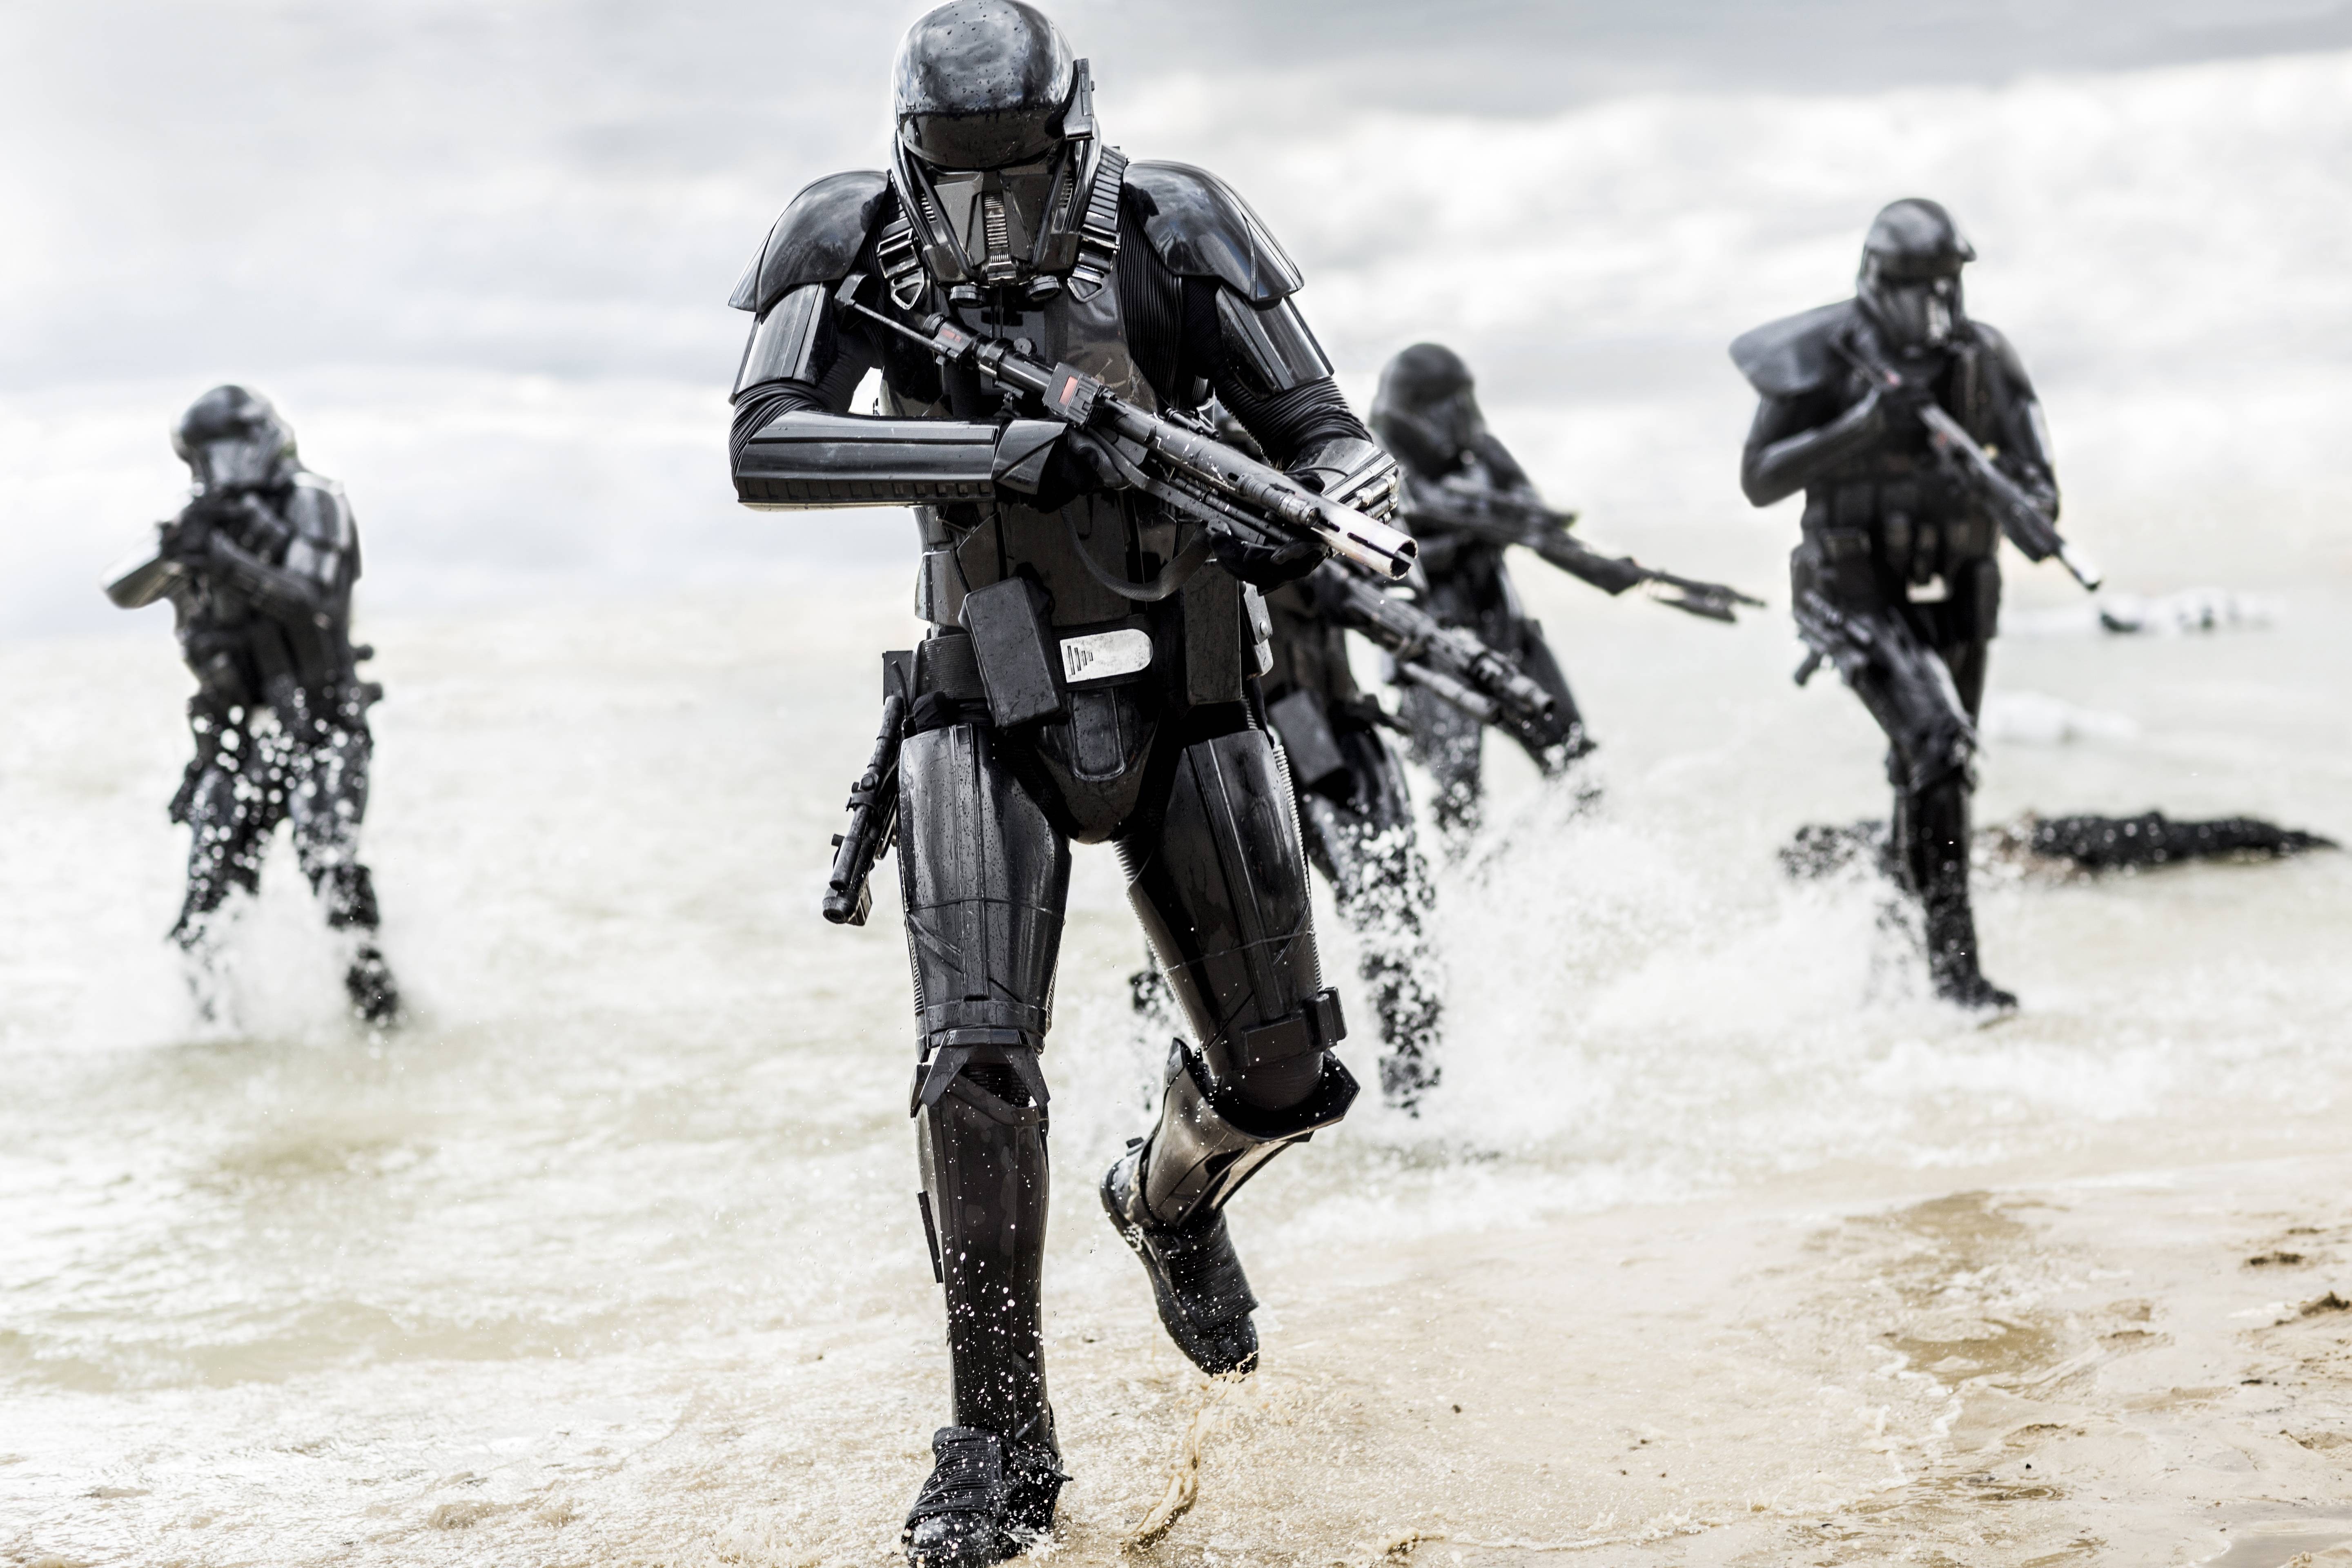 General 5760x3840 Star Wars Rogue One: A Star Wars Story Death Troopers Imperial Forces soldier military movies science fiction film stills